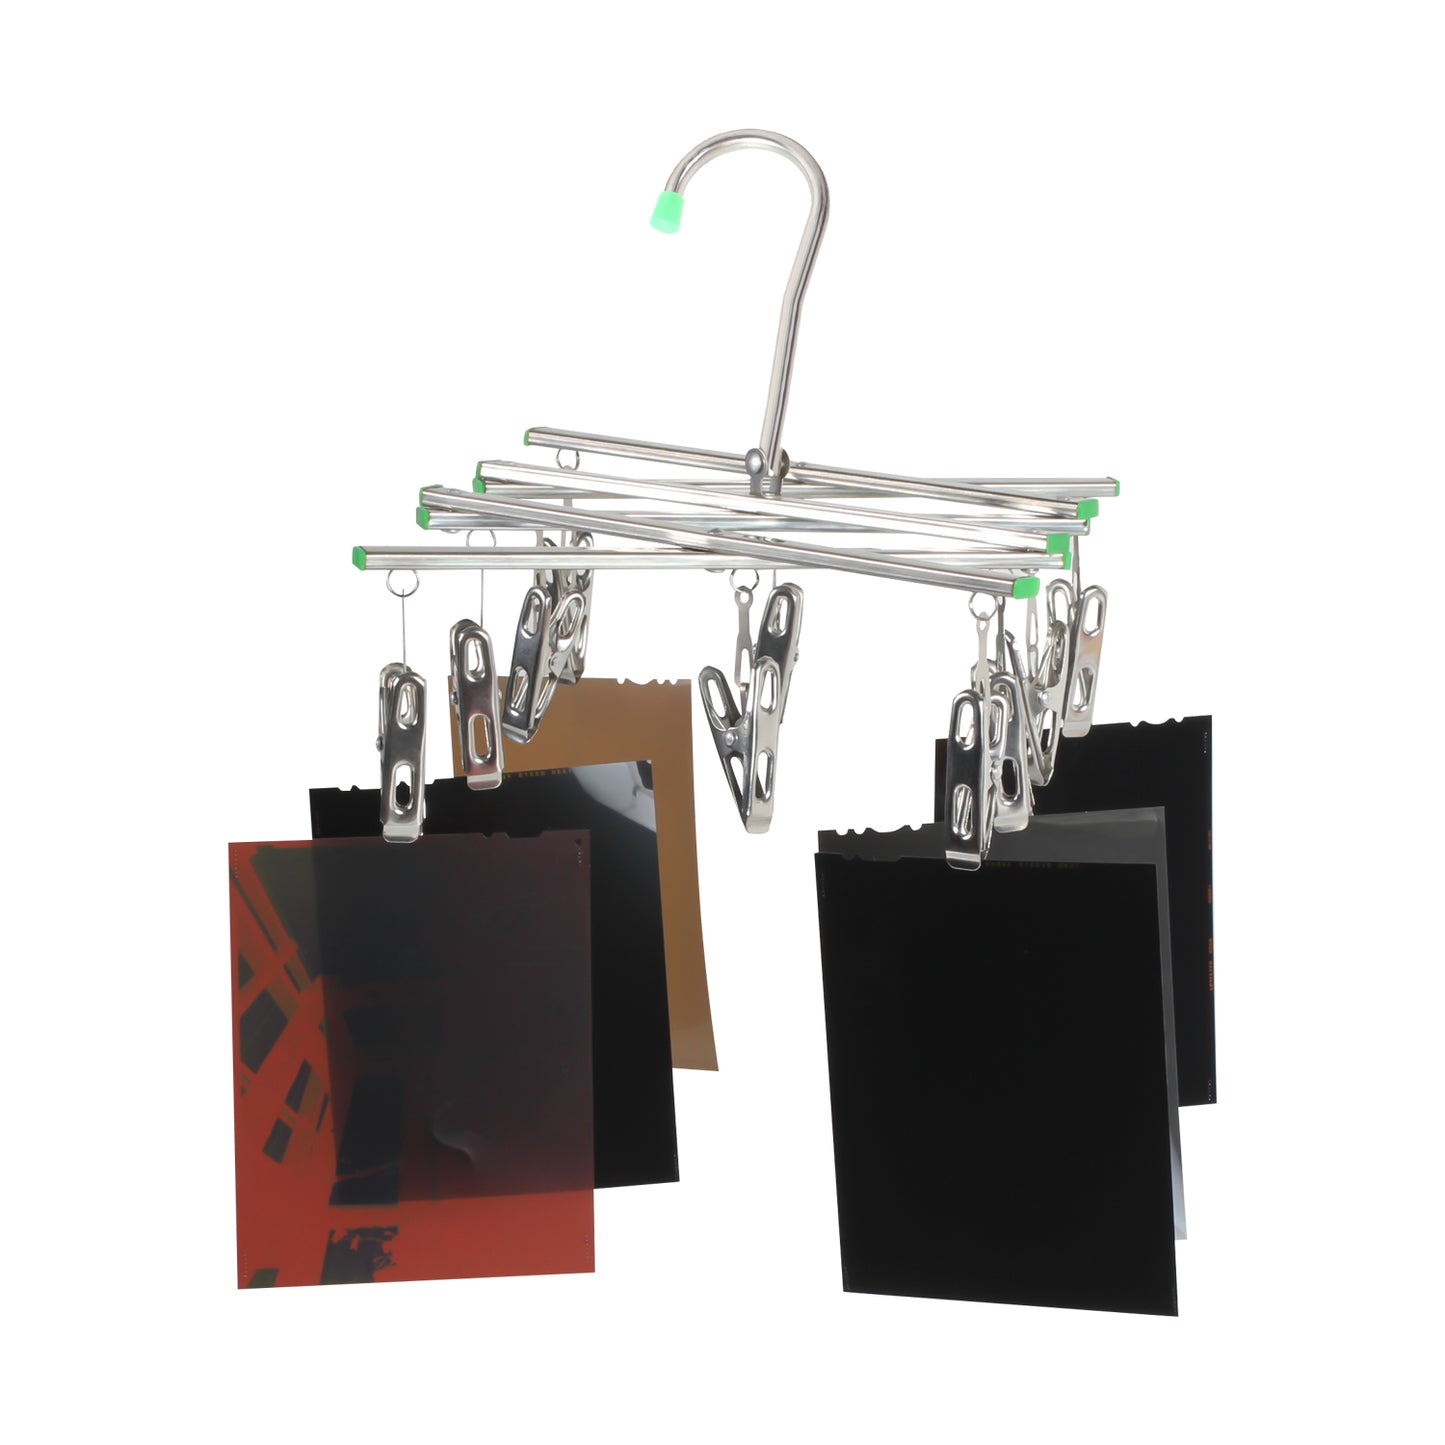 Collapsible Foldable Roll Sheet Film Drying Rack Hanging Frame Clips Darkroom 120 135 4x5 Negative Finishing